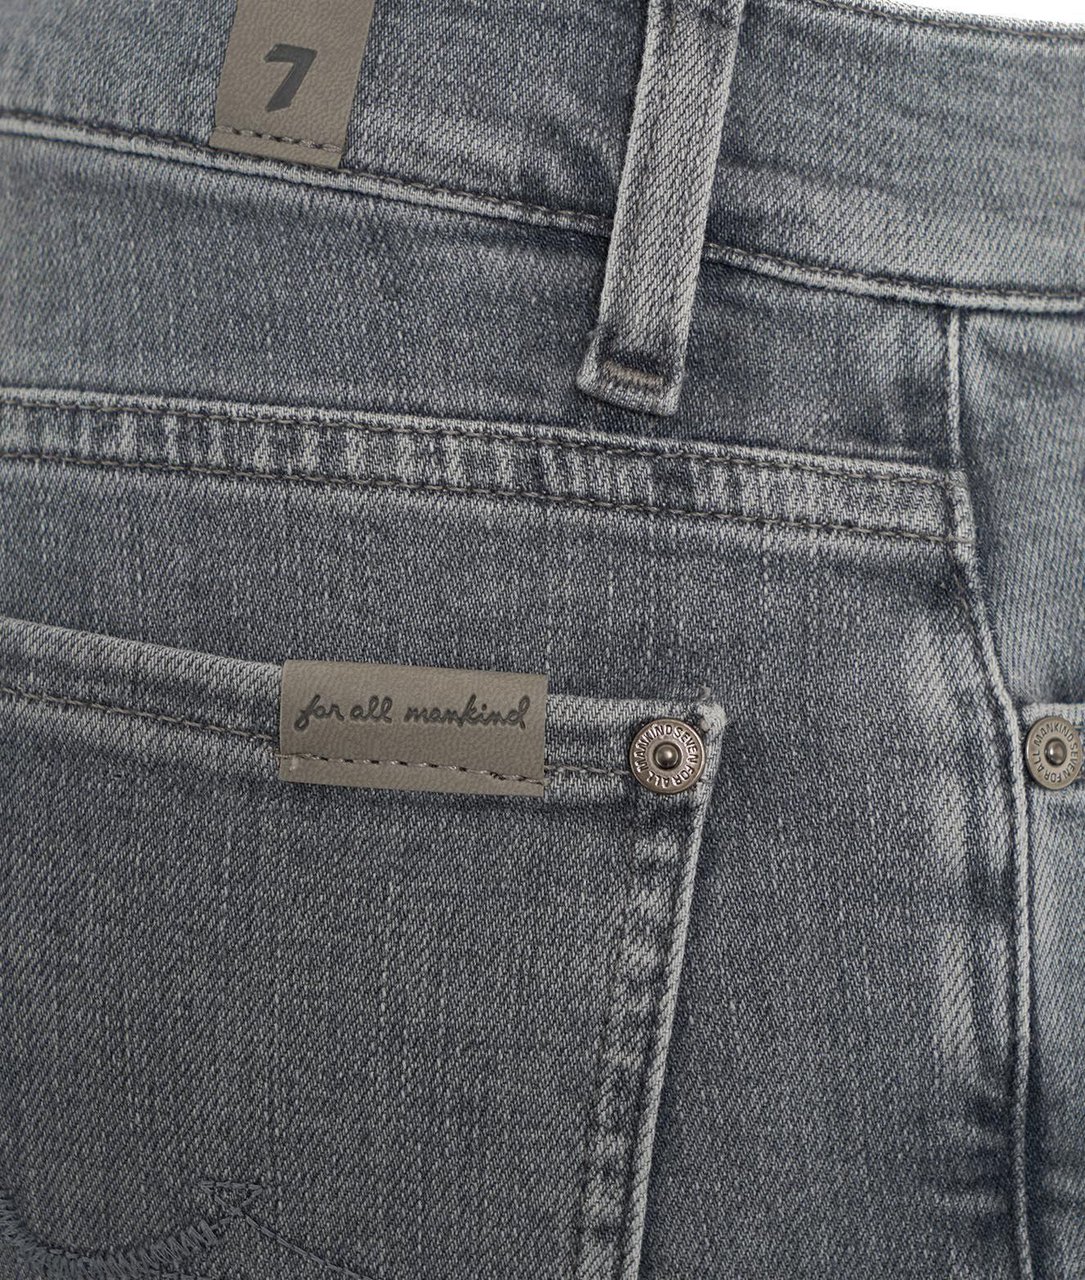 7 For All Mankind Jeans "The Straight" Grijs